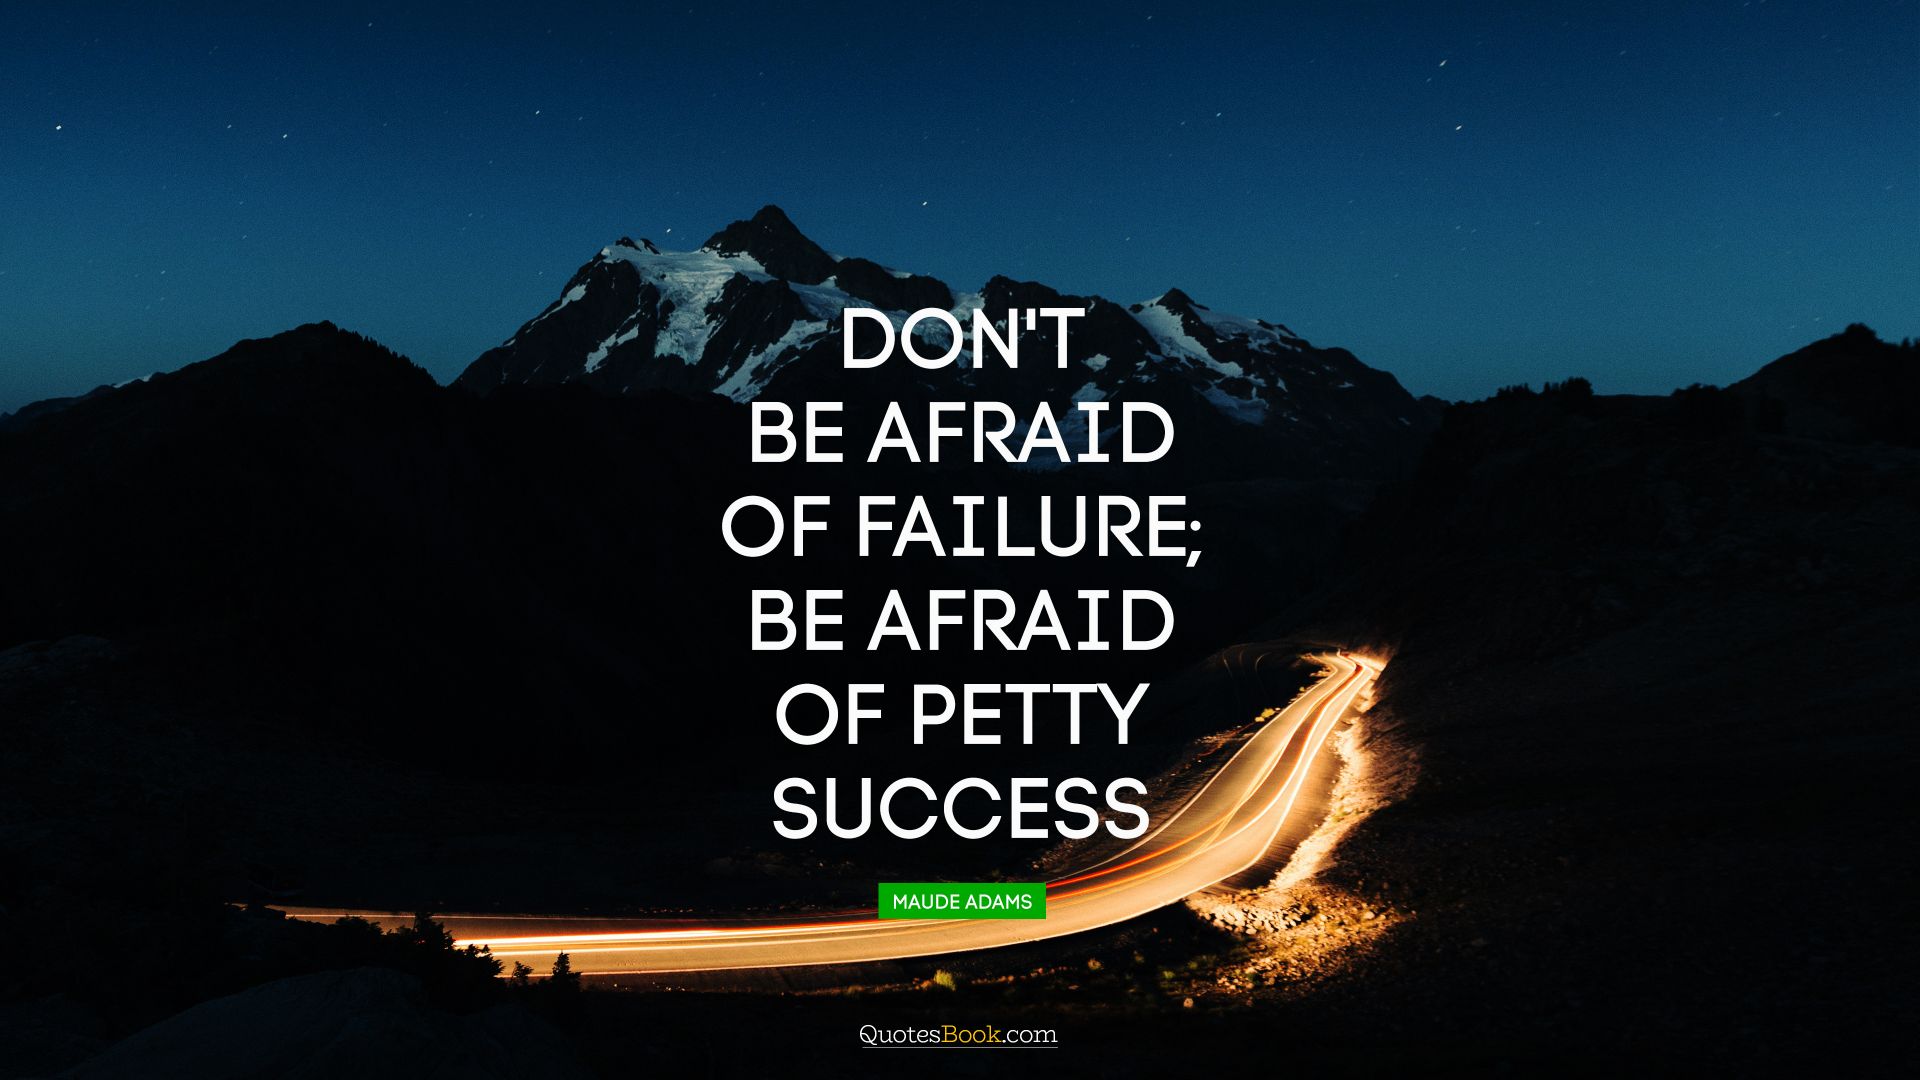 Don't be afraid of failure; be afraid of petty success. - Quote by Maude Adams